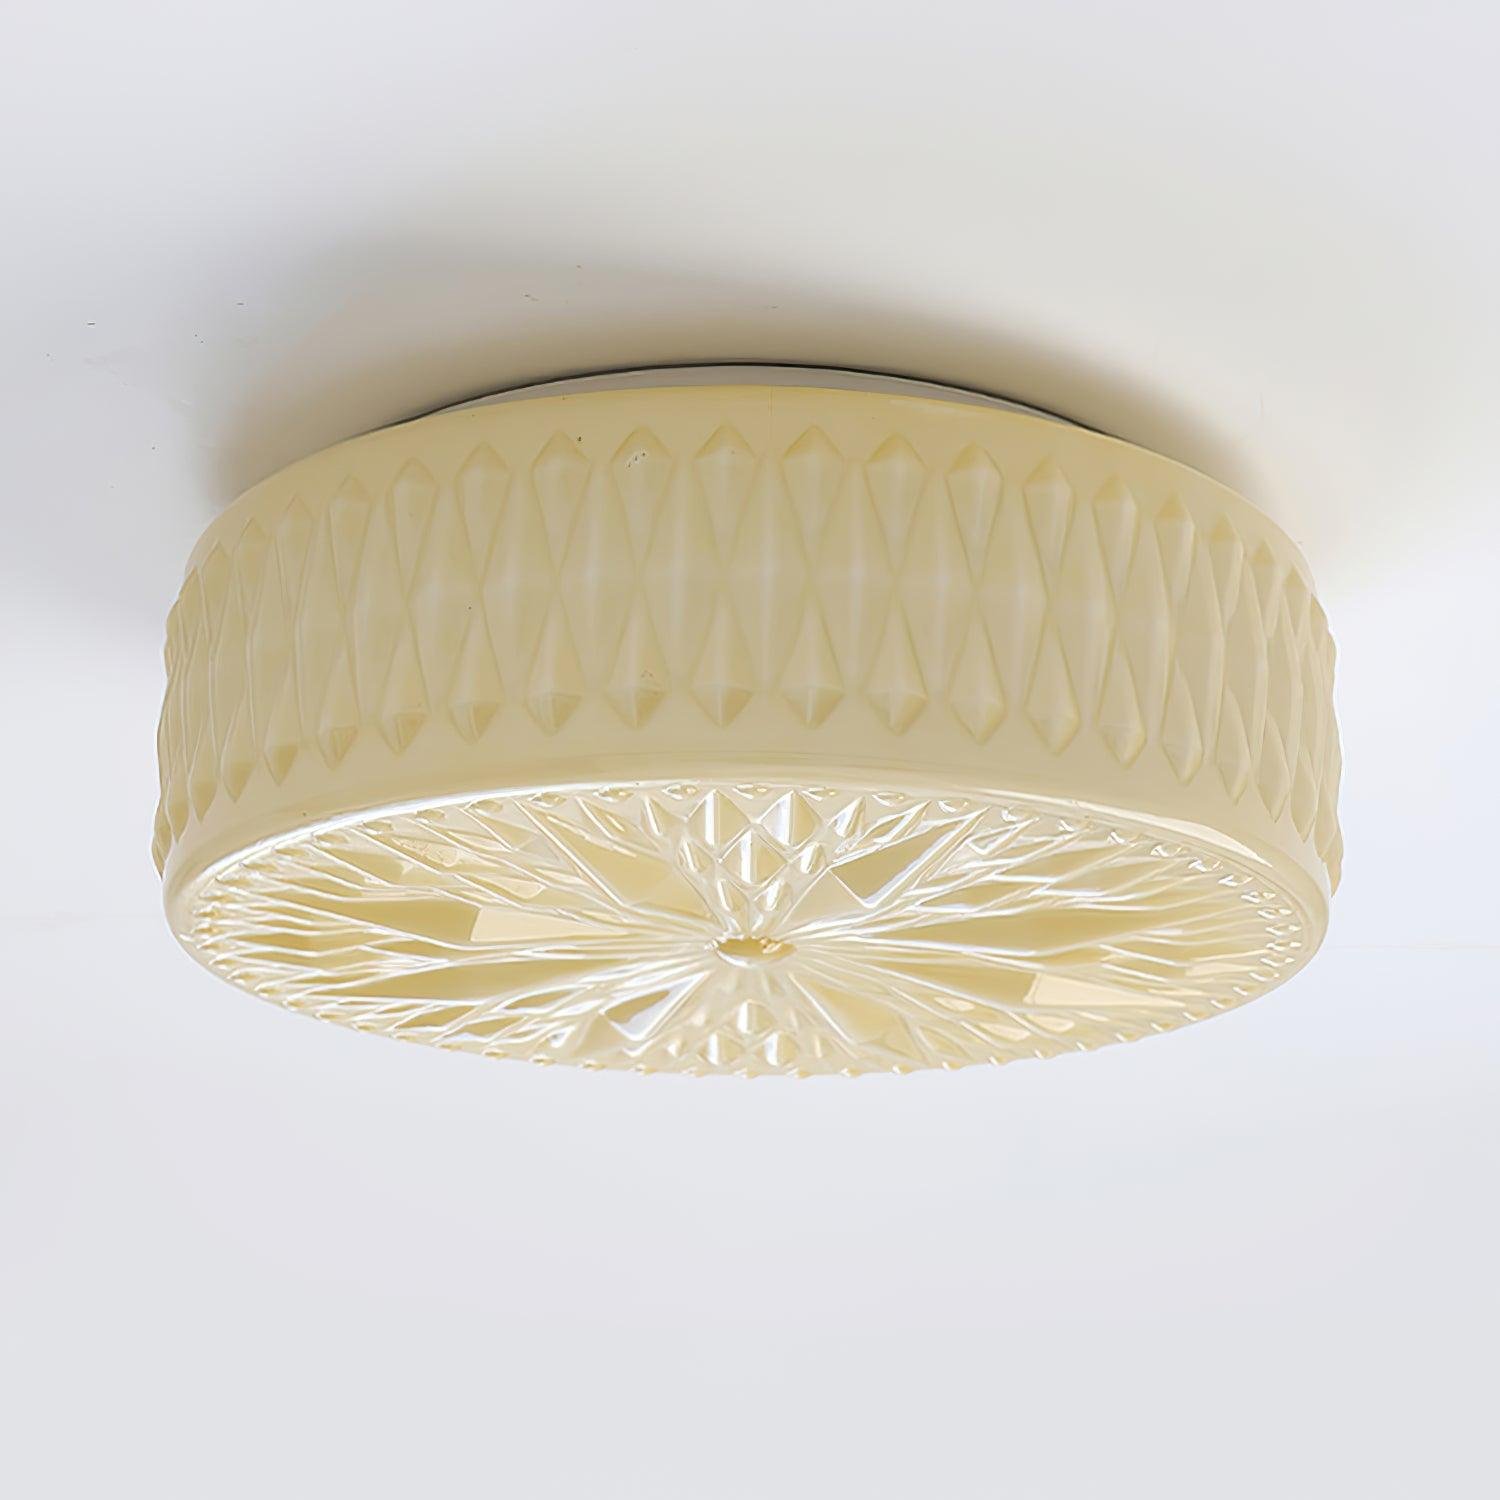 Beige Adler Ceiling Light in Cool Light, with a diameter of 15 inches and a height of 5.9 inches (or 38cm x 15cm).